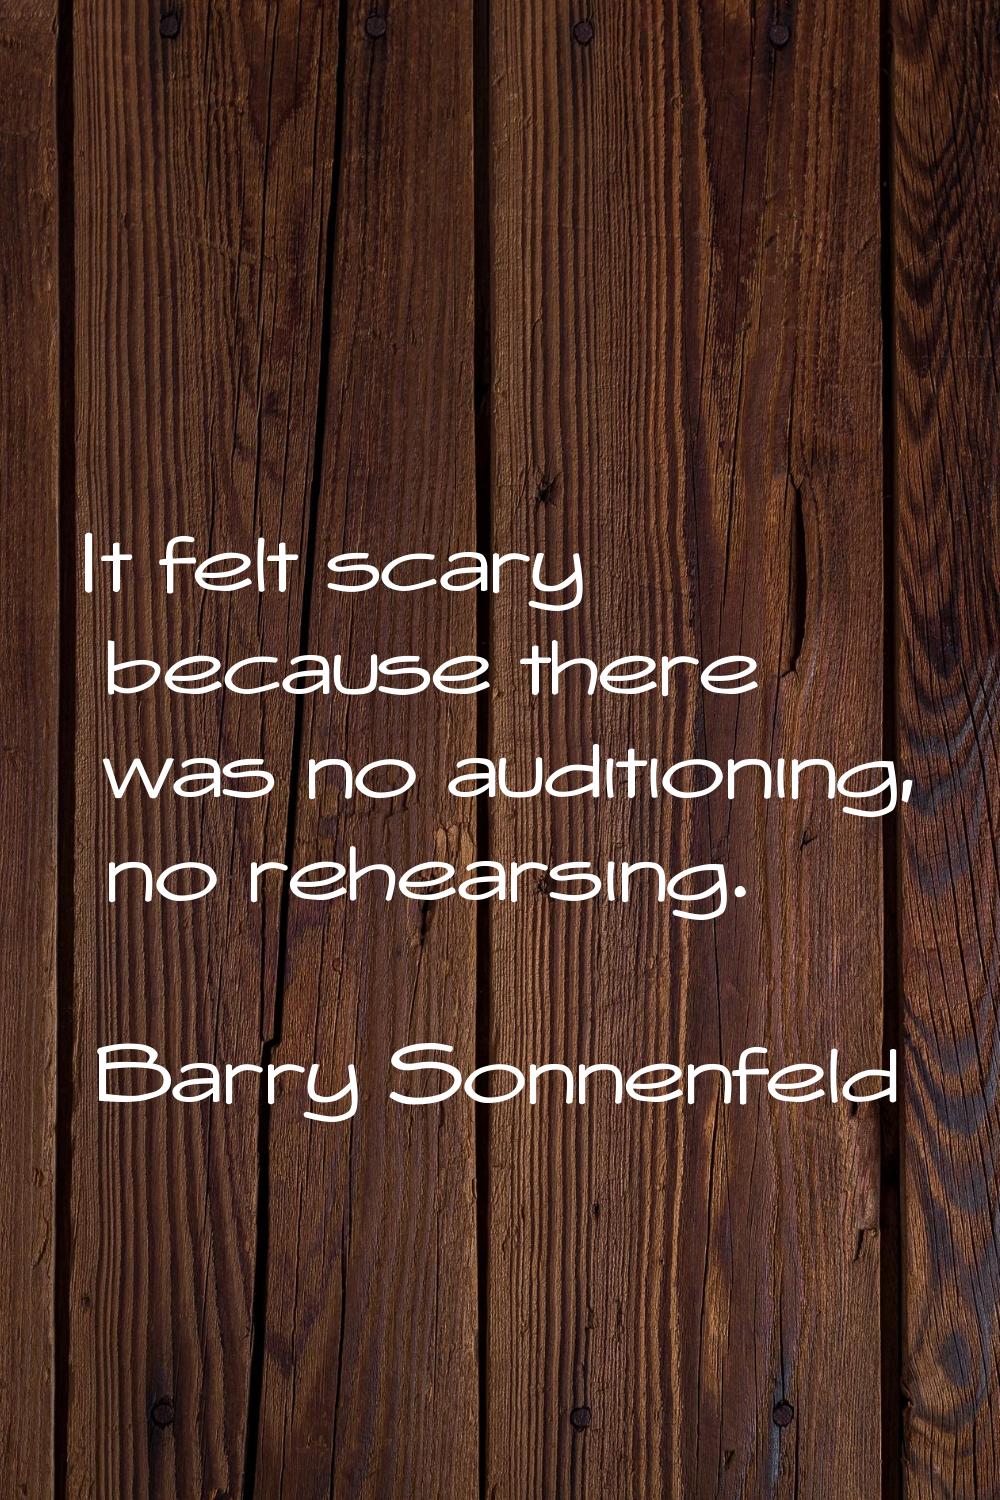 It felt scary because there was no auditioning, no rehearsing.